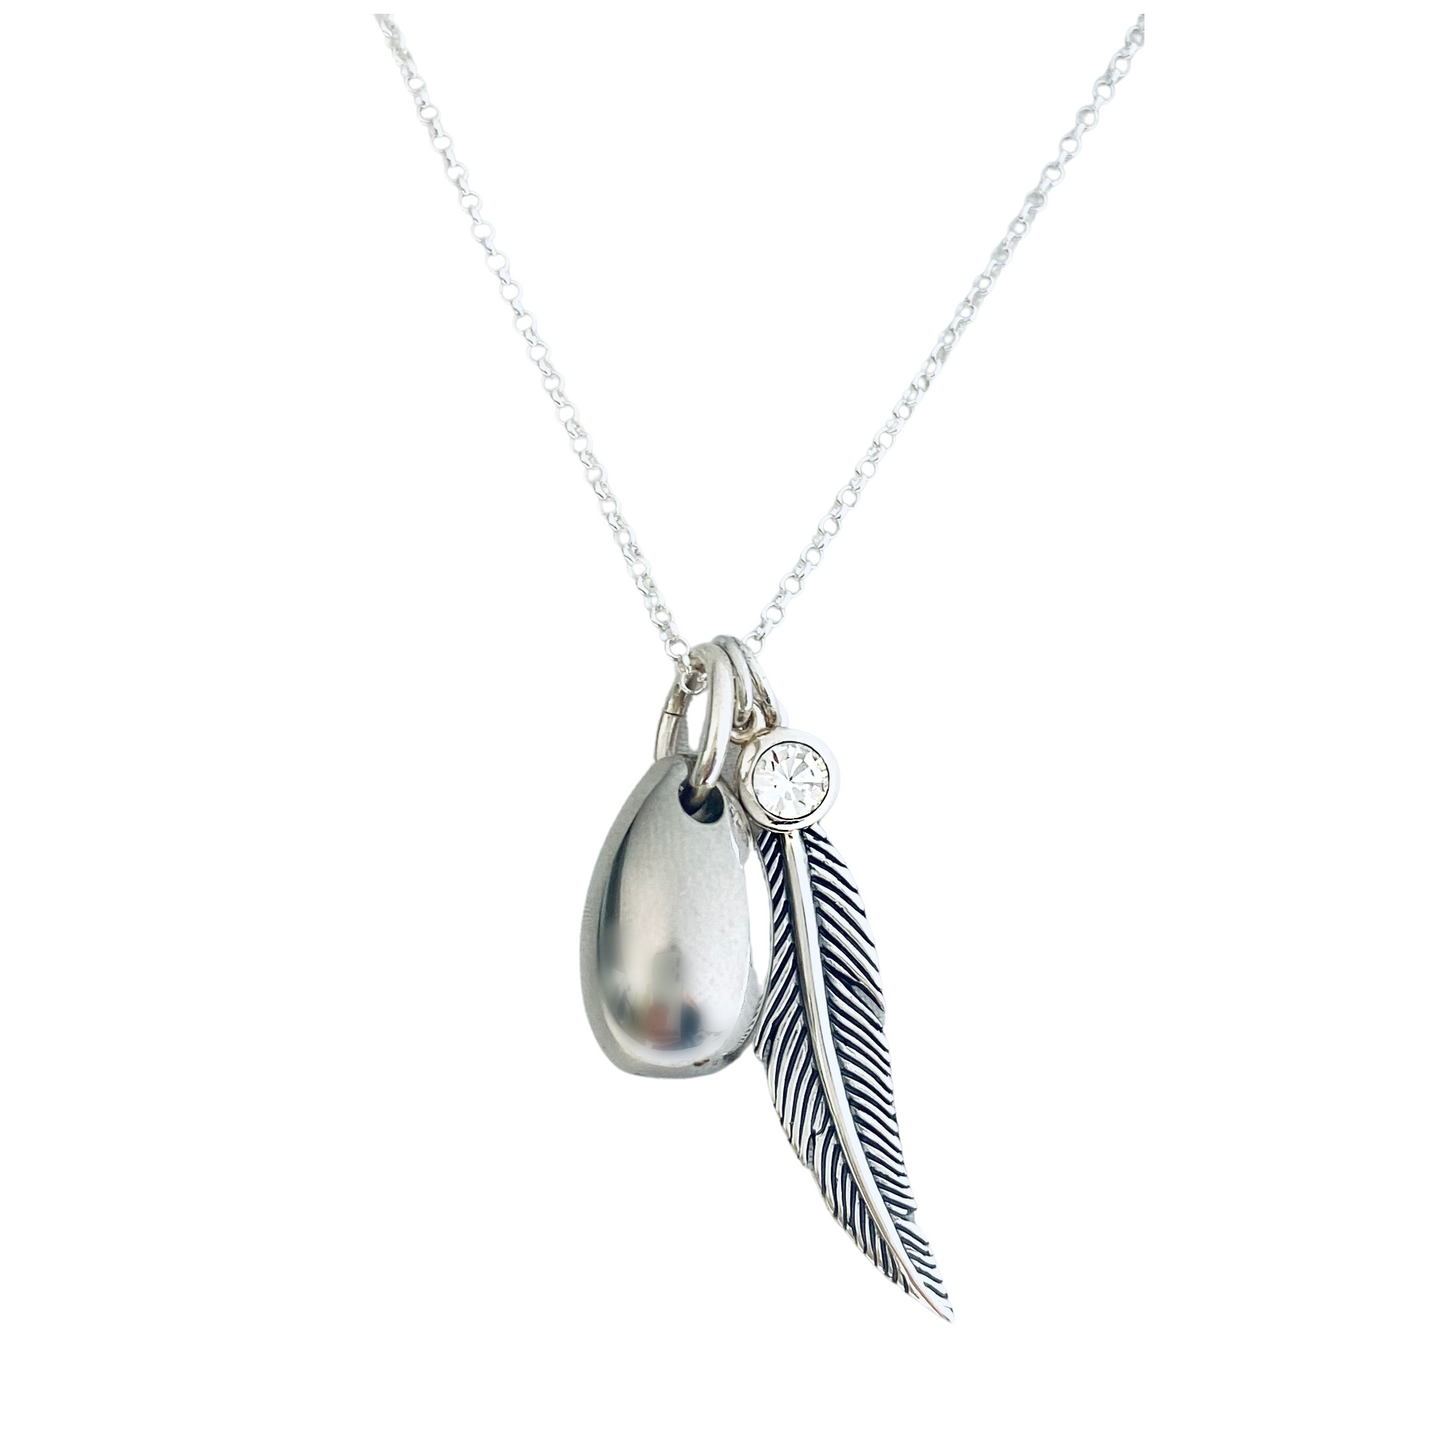 Silver Feather Teardrop Urn Necklace with Optional Birthstone